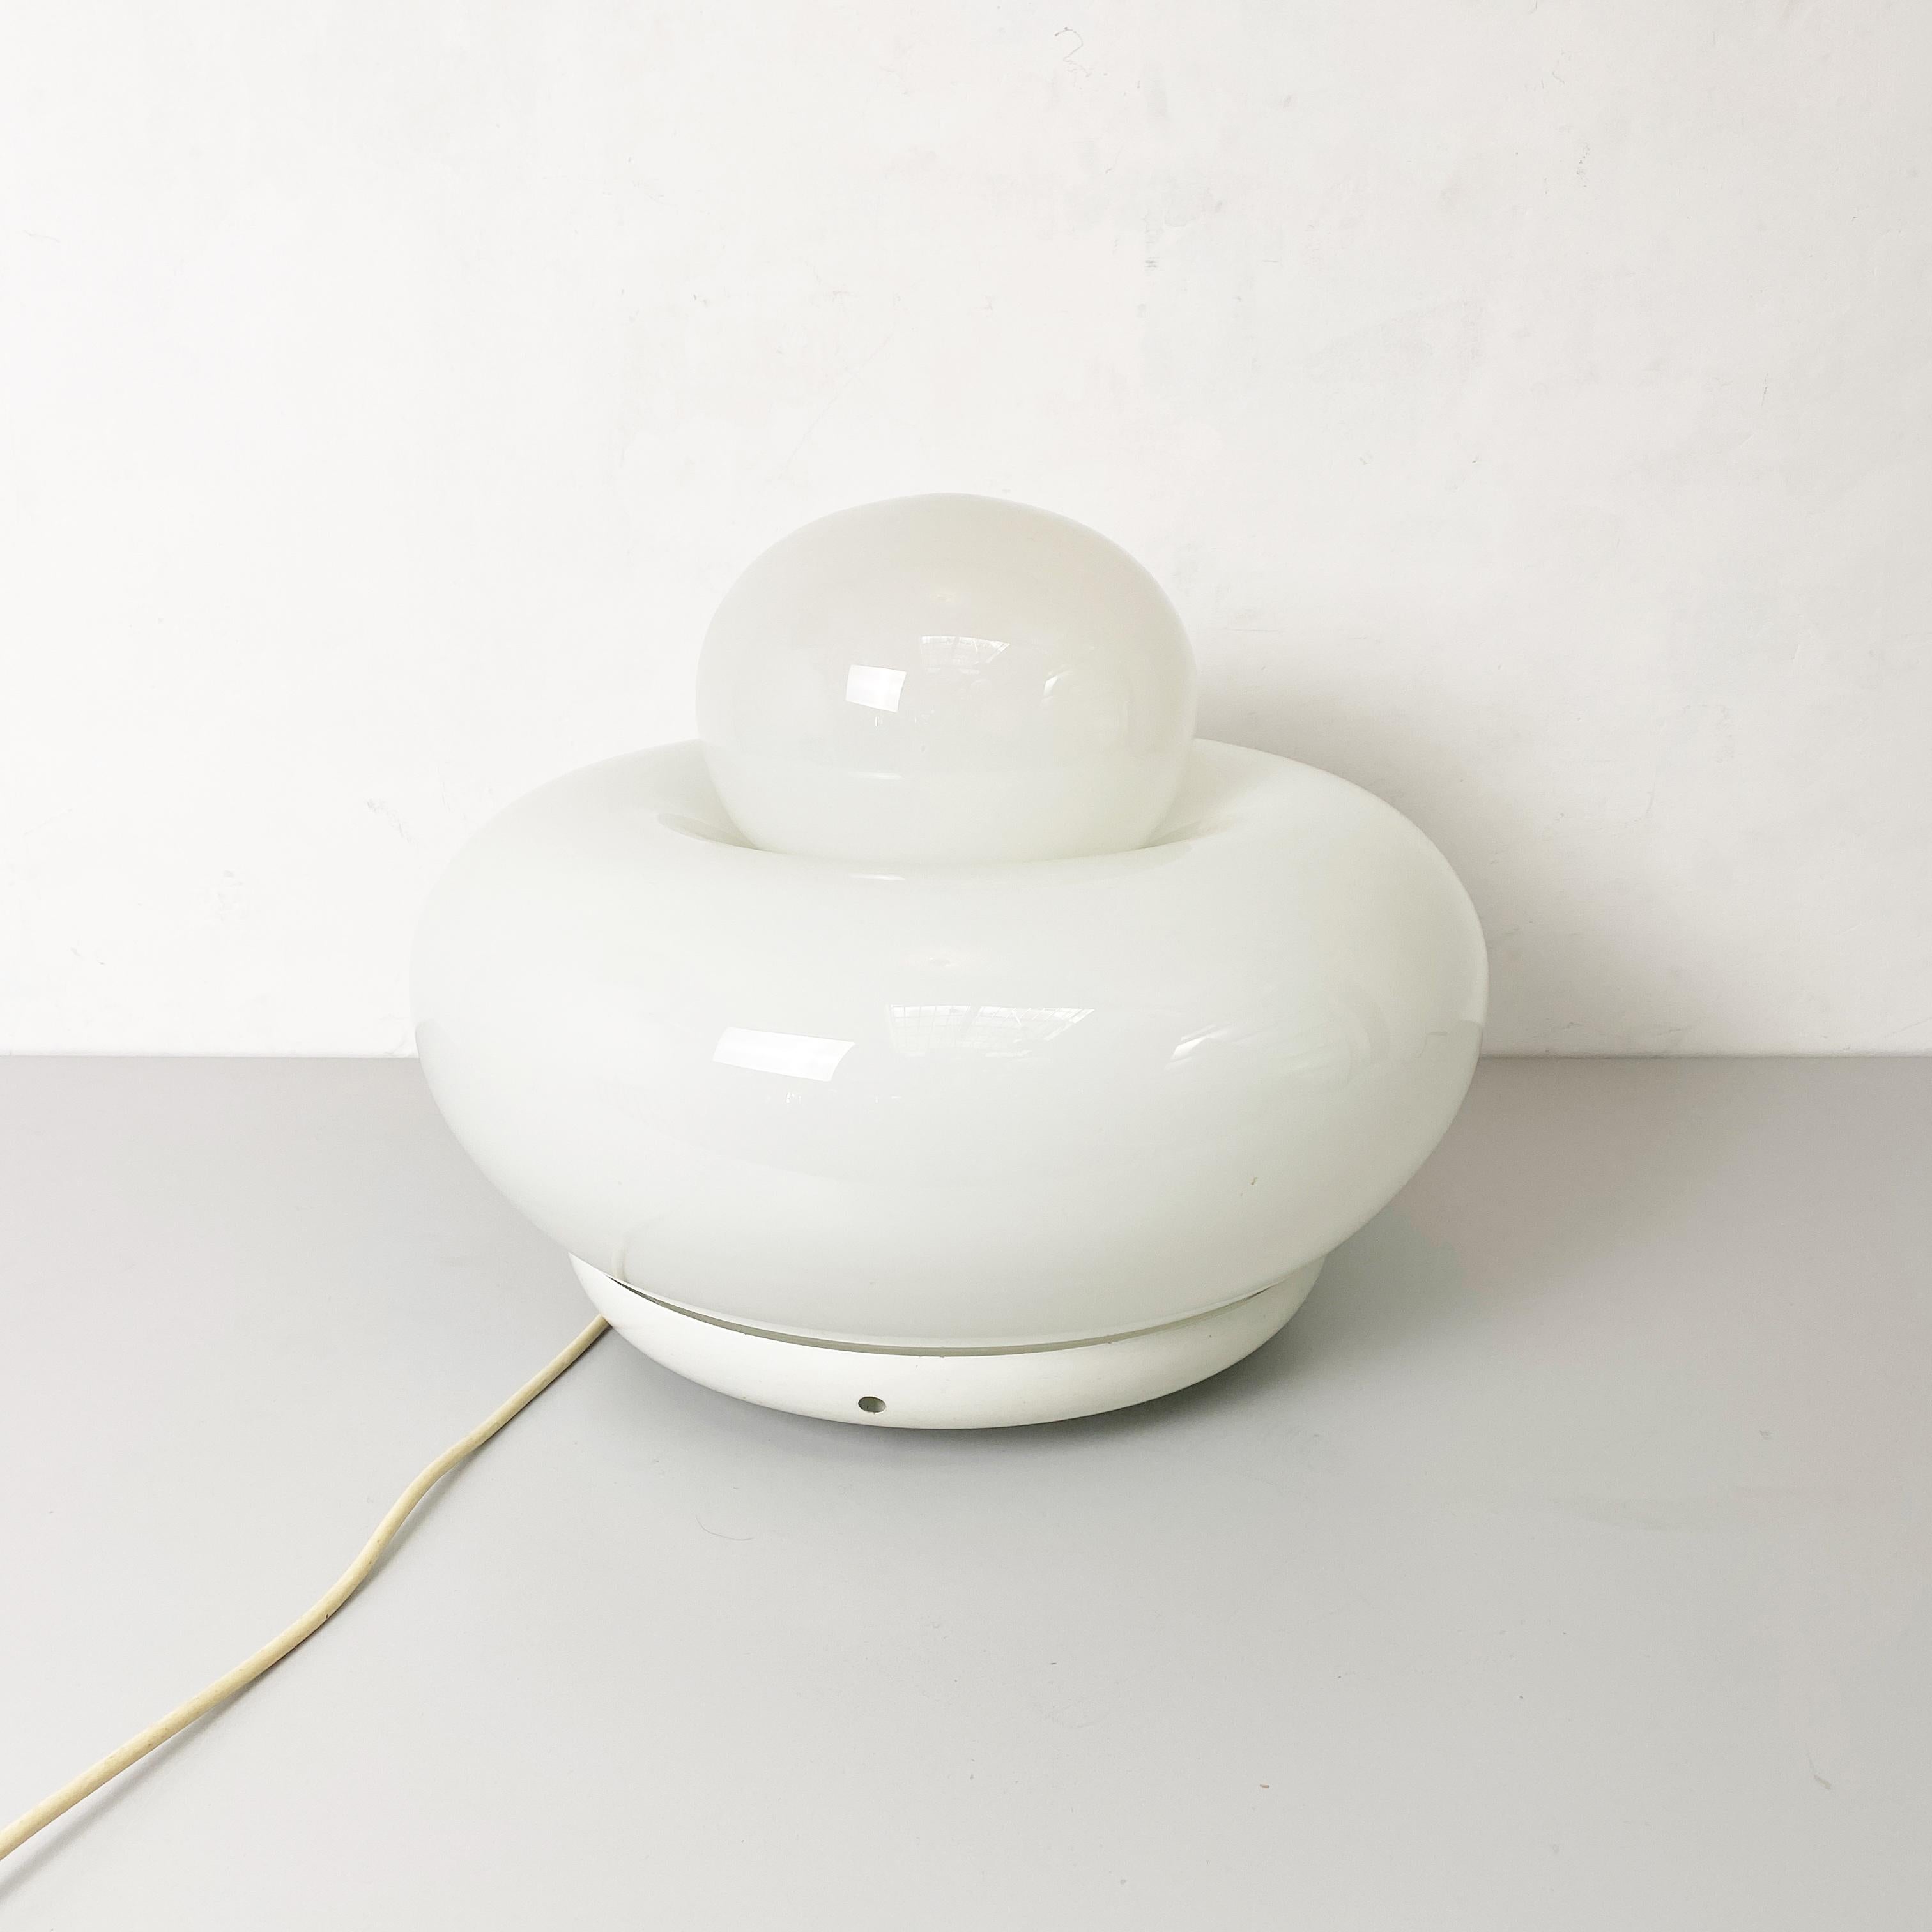 Mid-20th Century Italian Modern Electra Table Lamp by Giuliana Gramigna for Artemide, 1968 For Sale